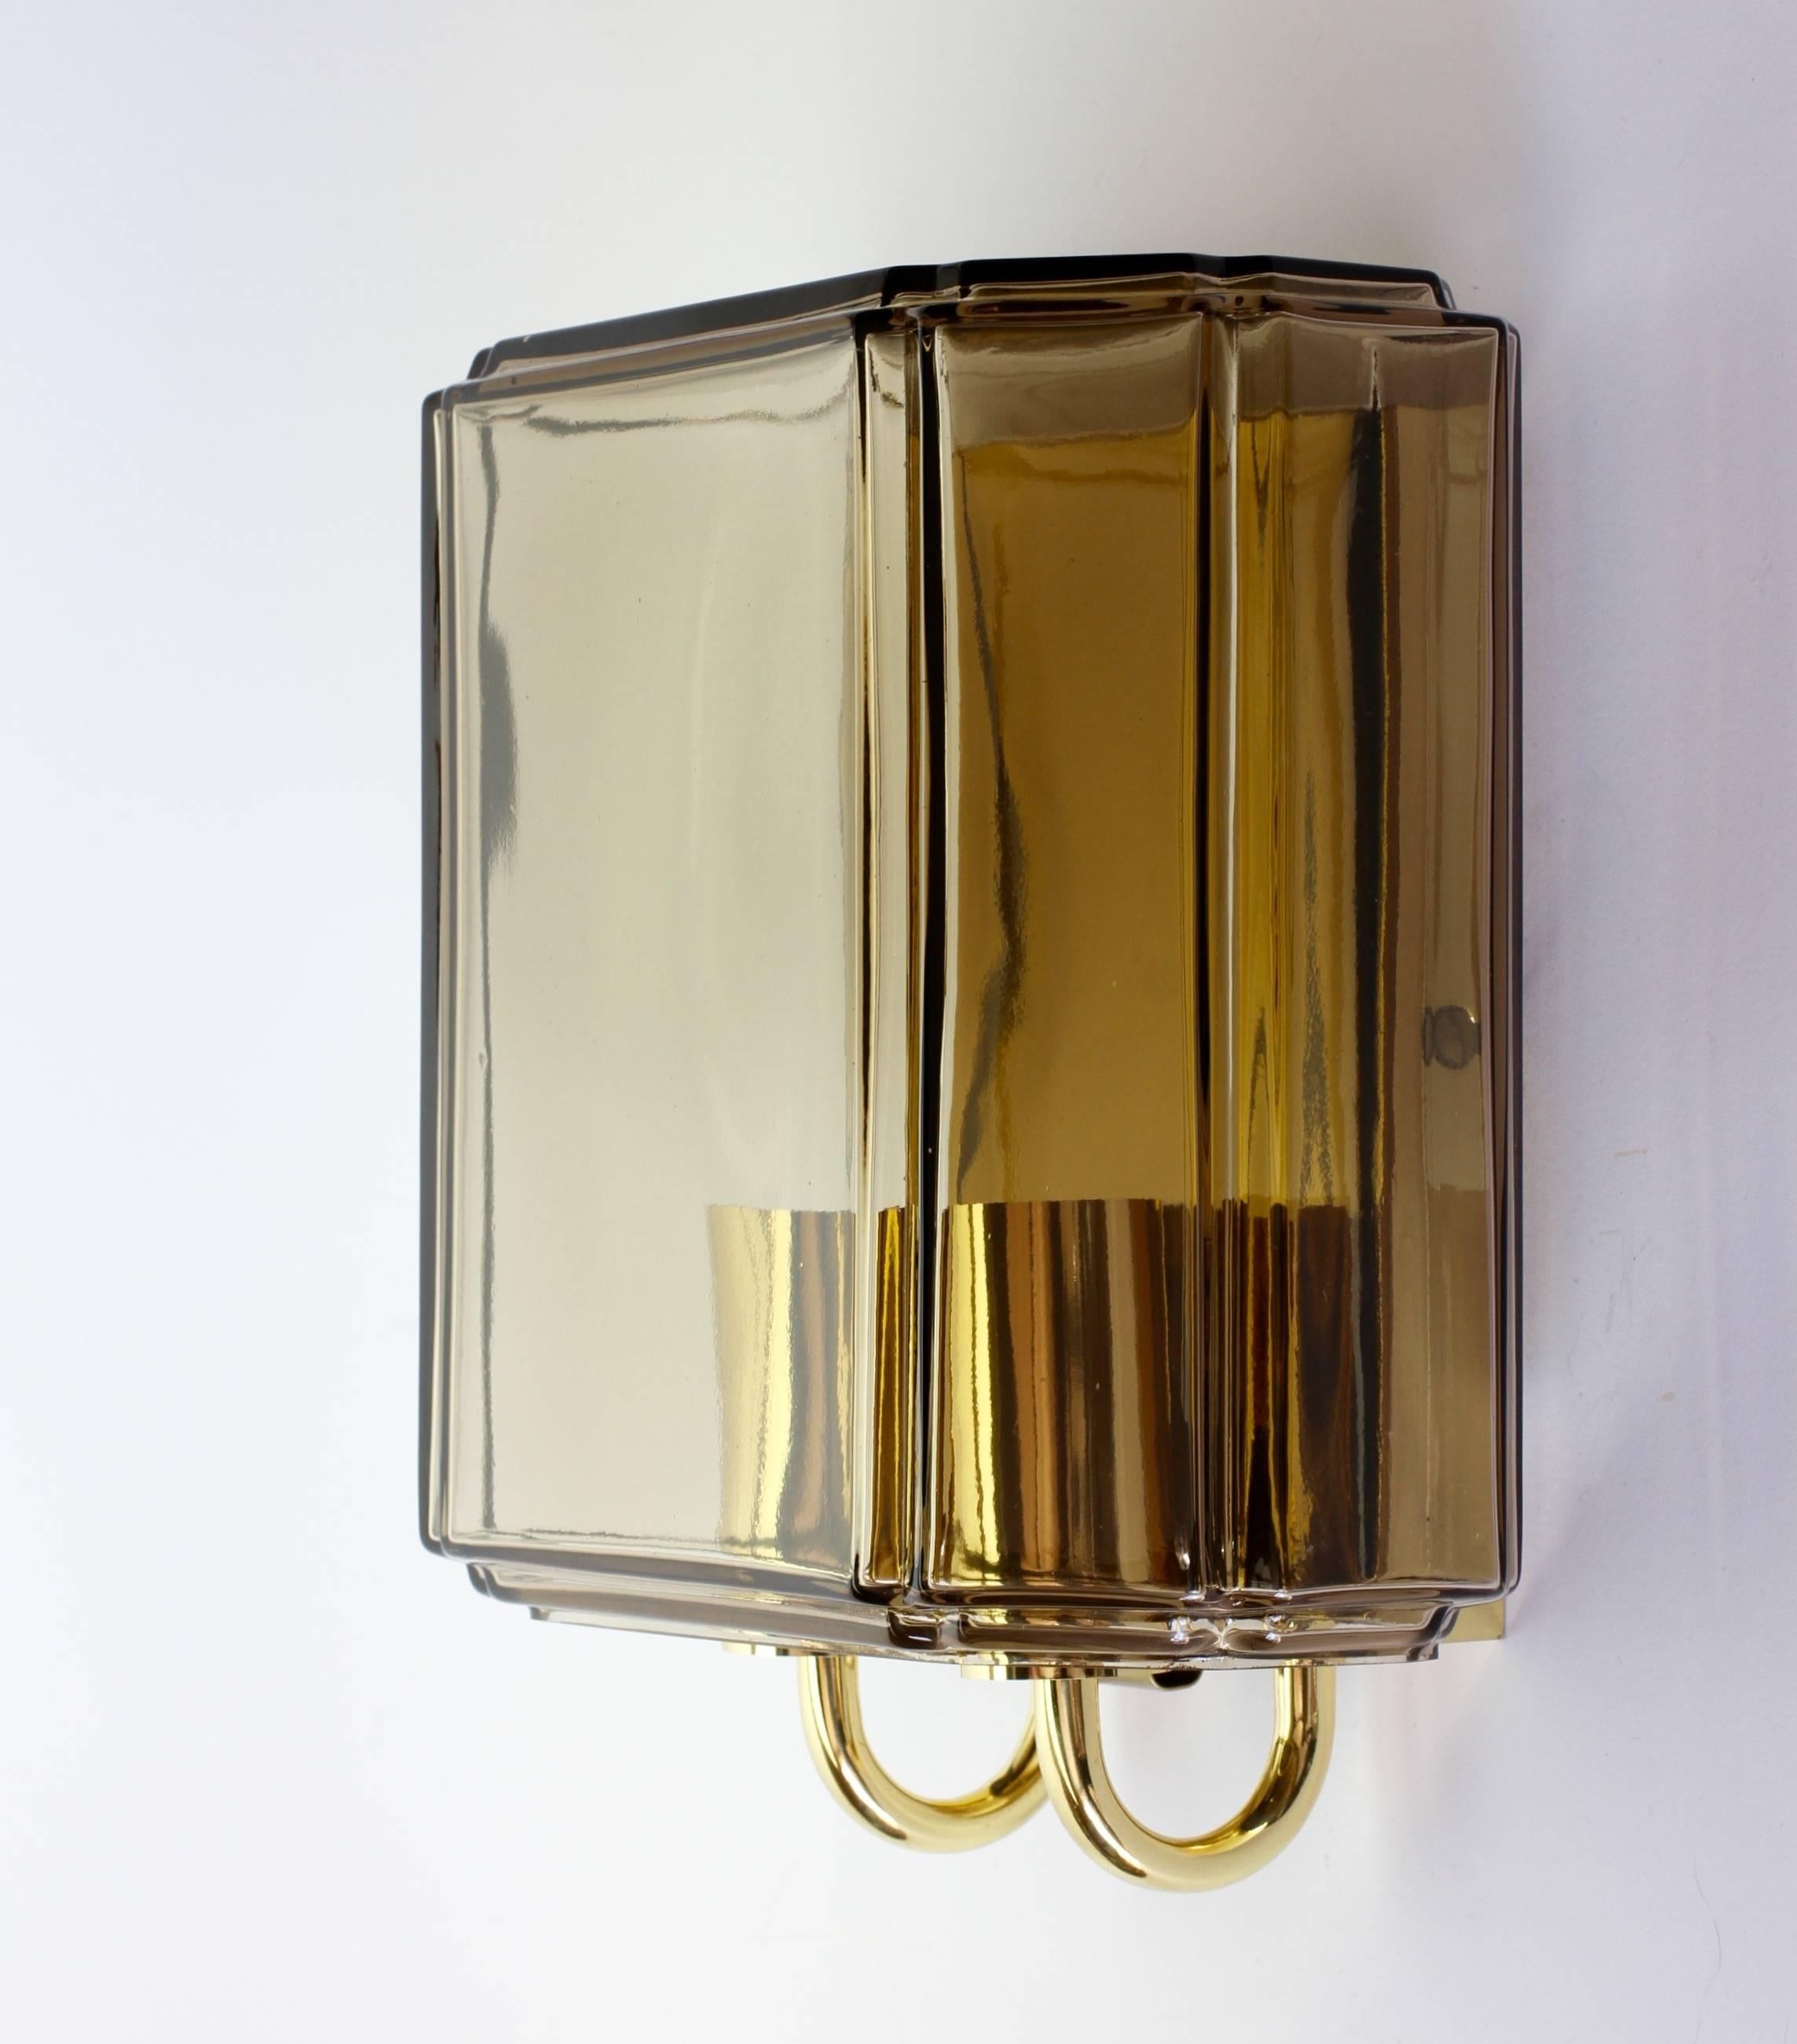 Molded Vintage 1970s Pair of Toned Glass Wall Mounted Sconces by Limburg, Germany For Sale